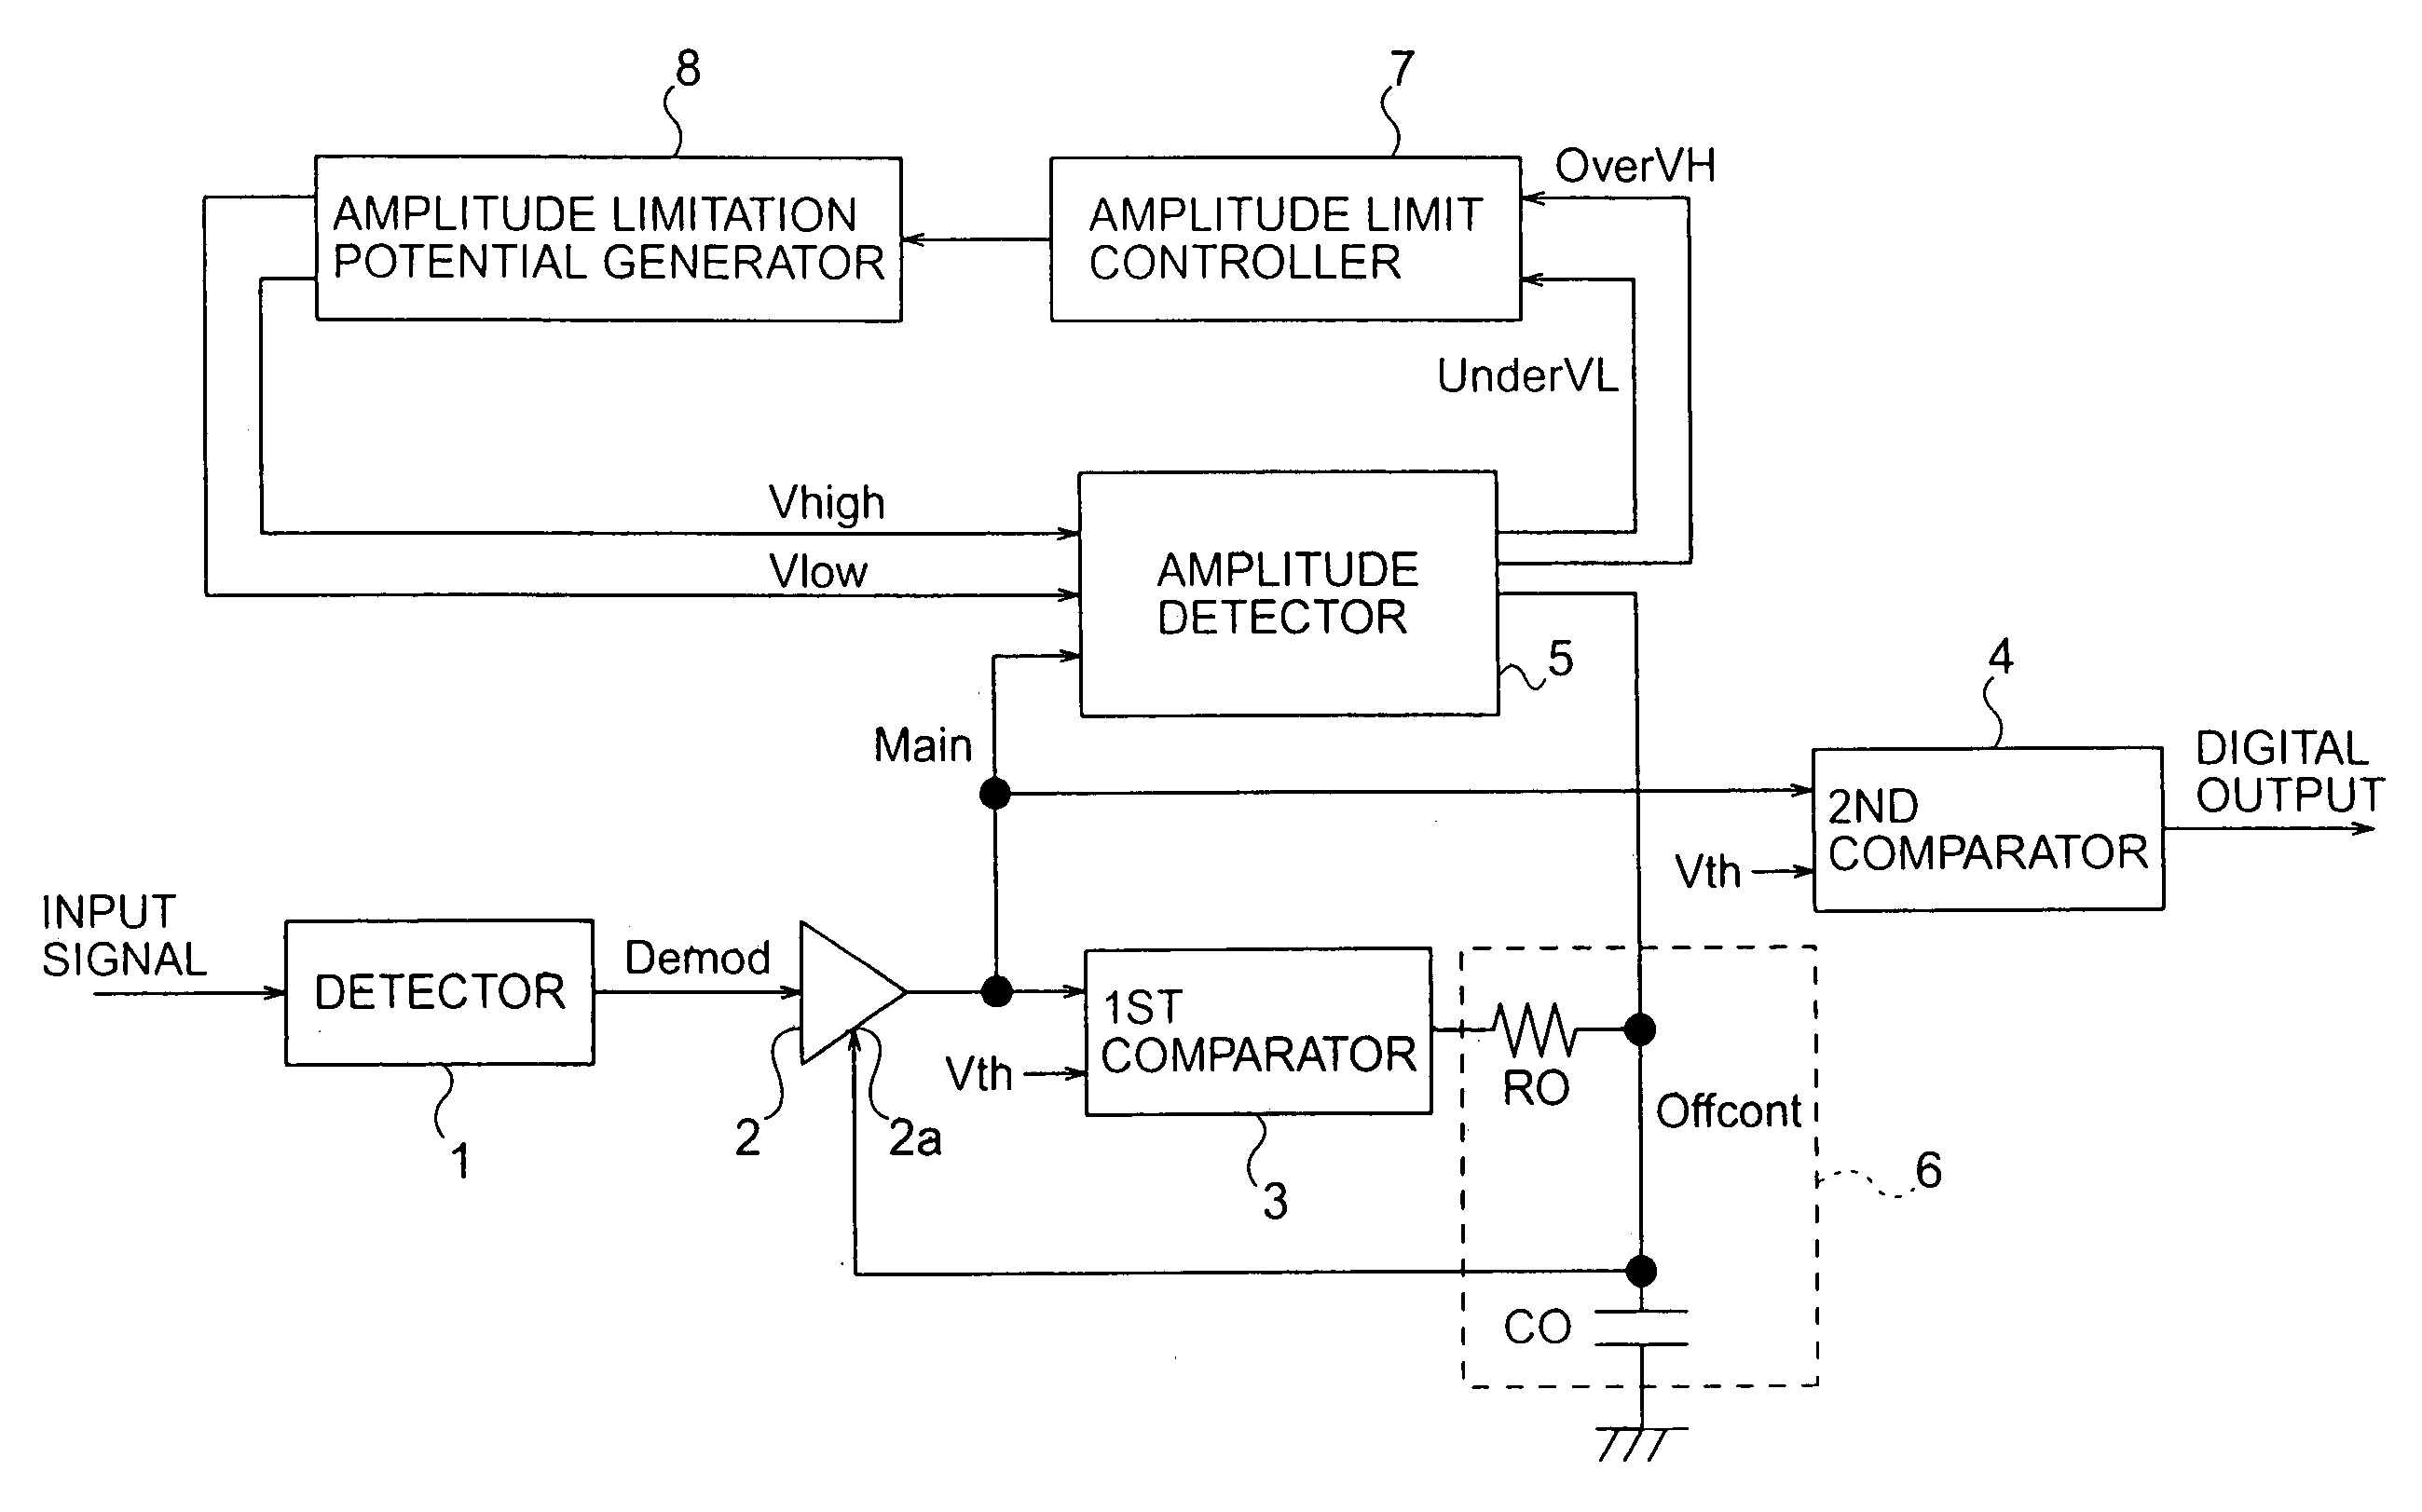 Signal compensation circuit and demodulating circuit with high-speed and low-speed feedback loops